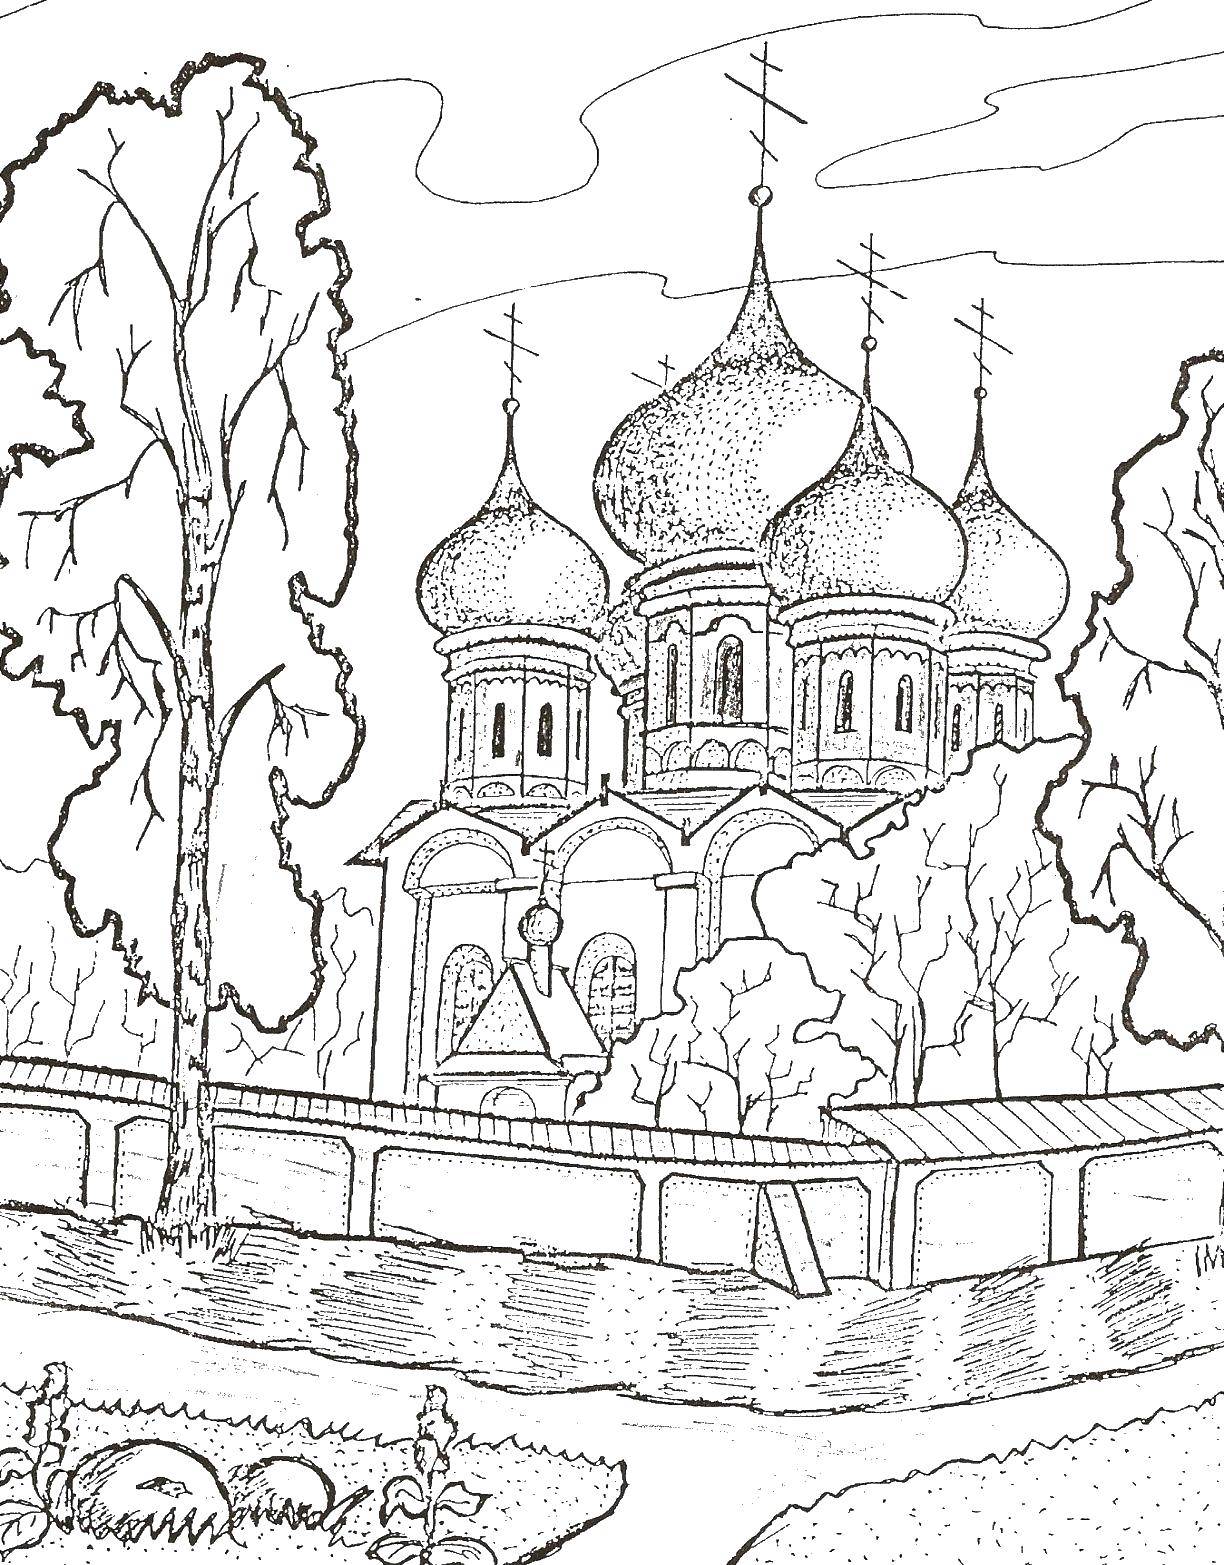 Coloring Church with trees. Category the Church. Tags:  Church, home.